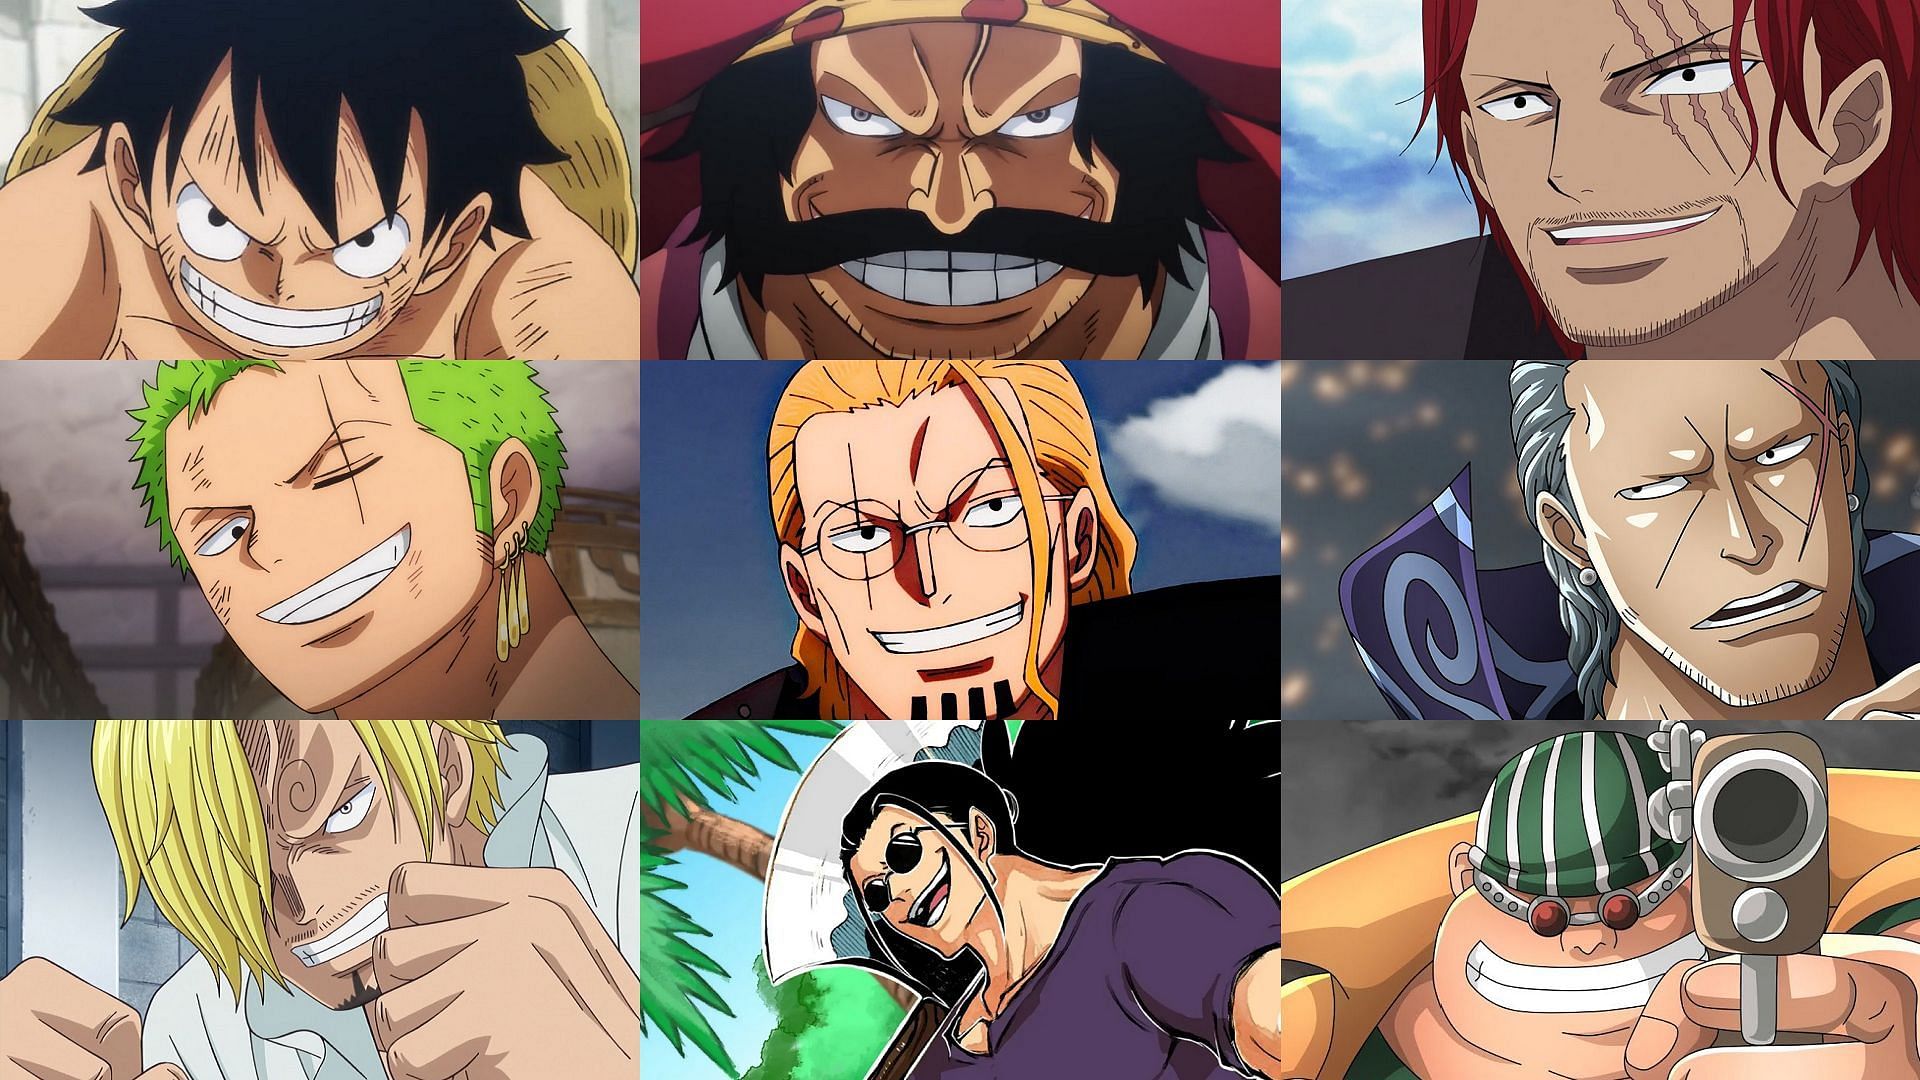 The parallel between Straw Hat Pirates, Roger Pirates, and Red Hair Pirates is clear (Image via Toei Animation, One Piece)